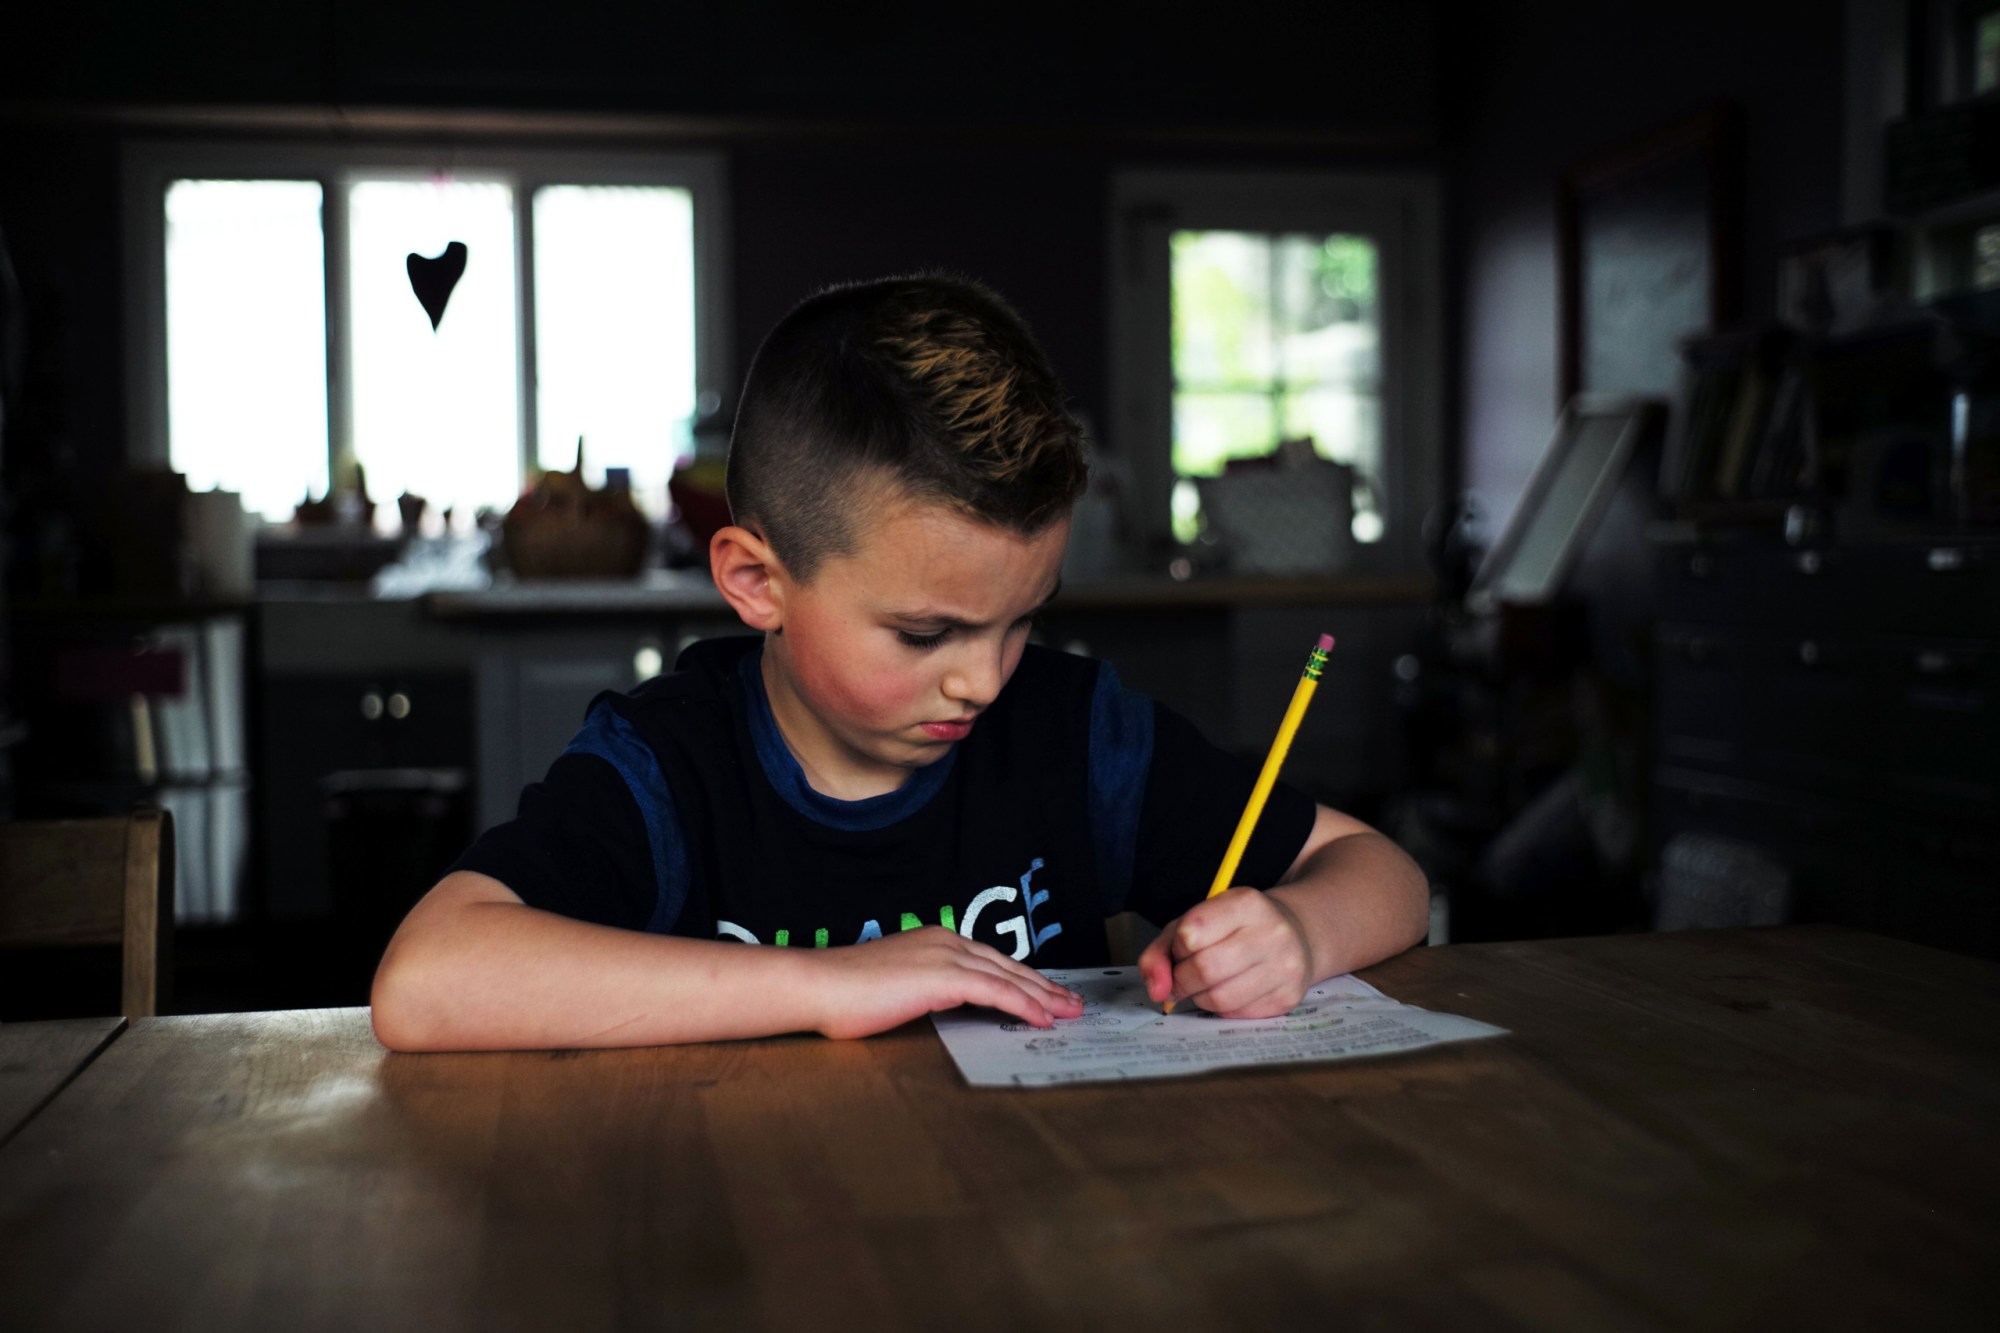 Seven-year-old transgender boy Jacob Lemay does his homework at his home in Melrose, Massachusetts, on May 9, 2017. 
For months in the Lemay home, the same phrase was repeated over and over by their troubled young child, barely more than a toddler, who showed growing signs of depression. 